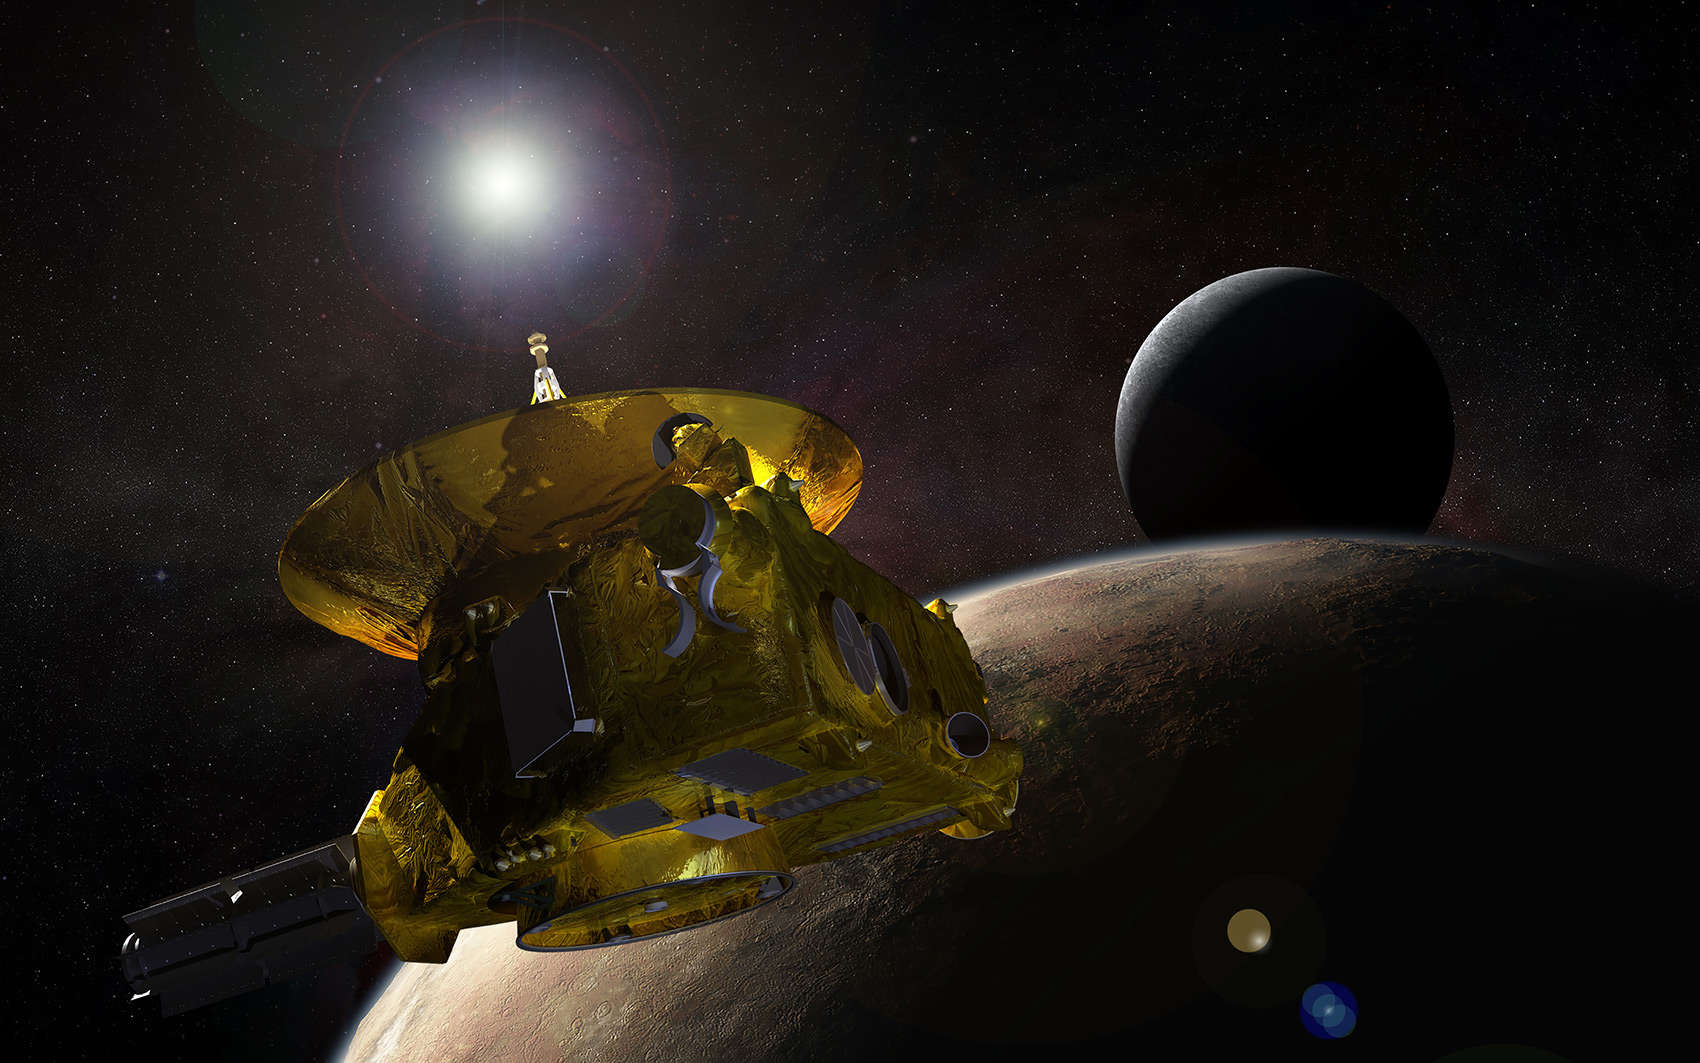 Artwork depicting the New Horizons spacecraft passing Pluto and its moon Charon. Credit: JHUAPL/SwRI